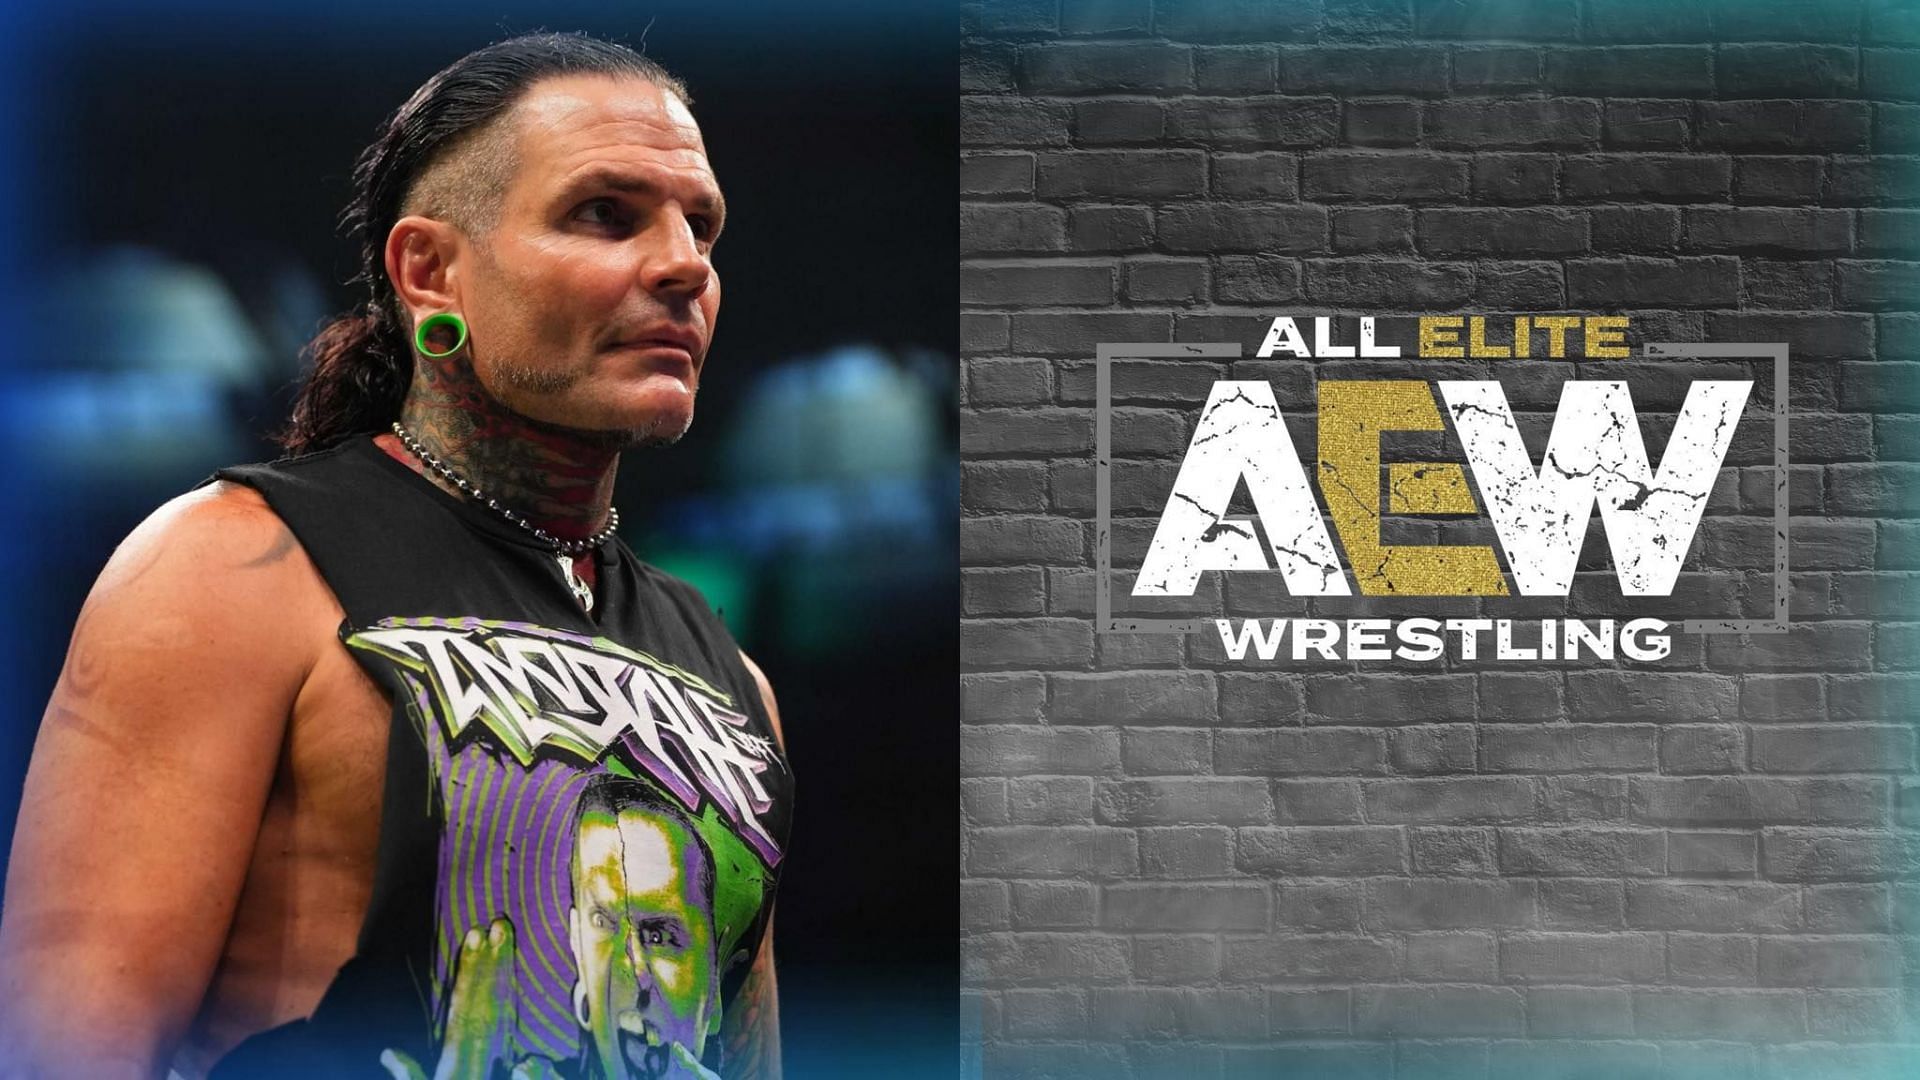 Jeff Hardy (left) and AEW logo (right).